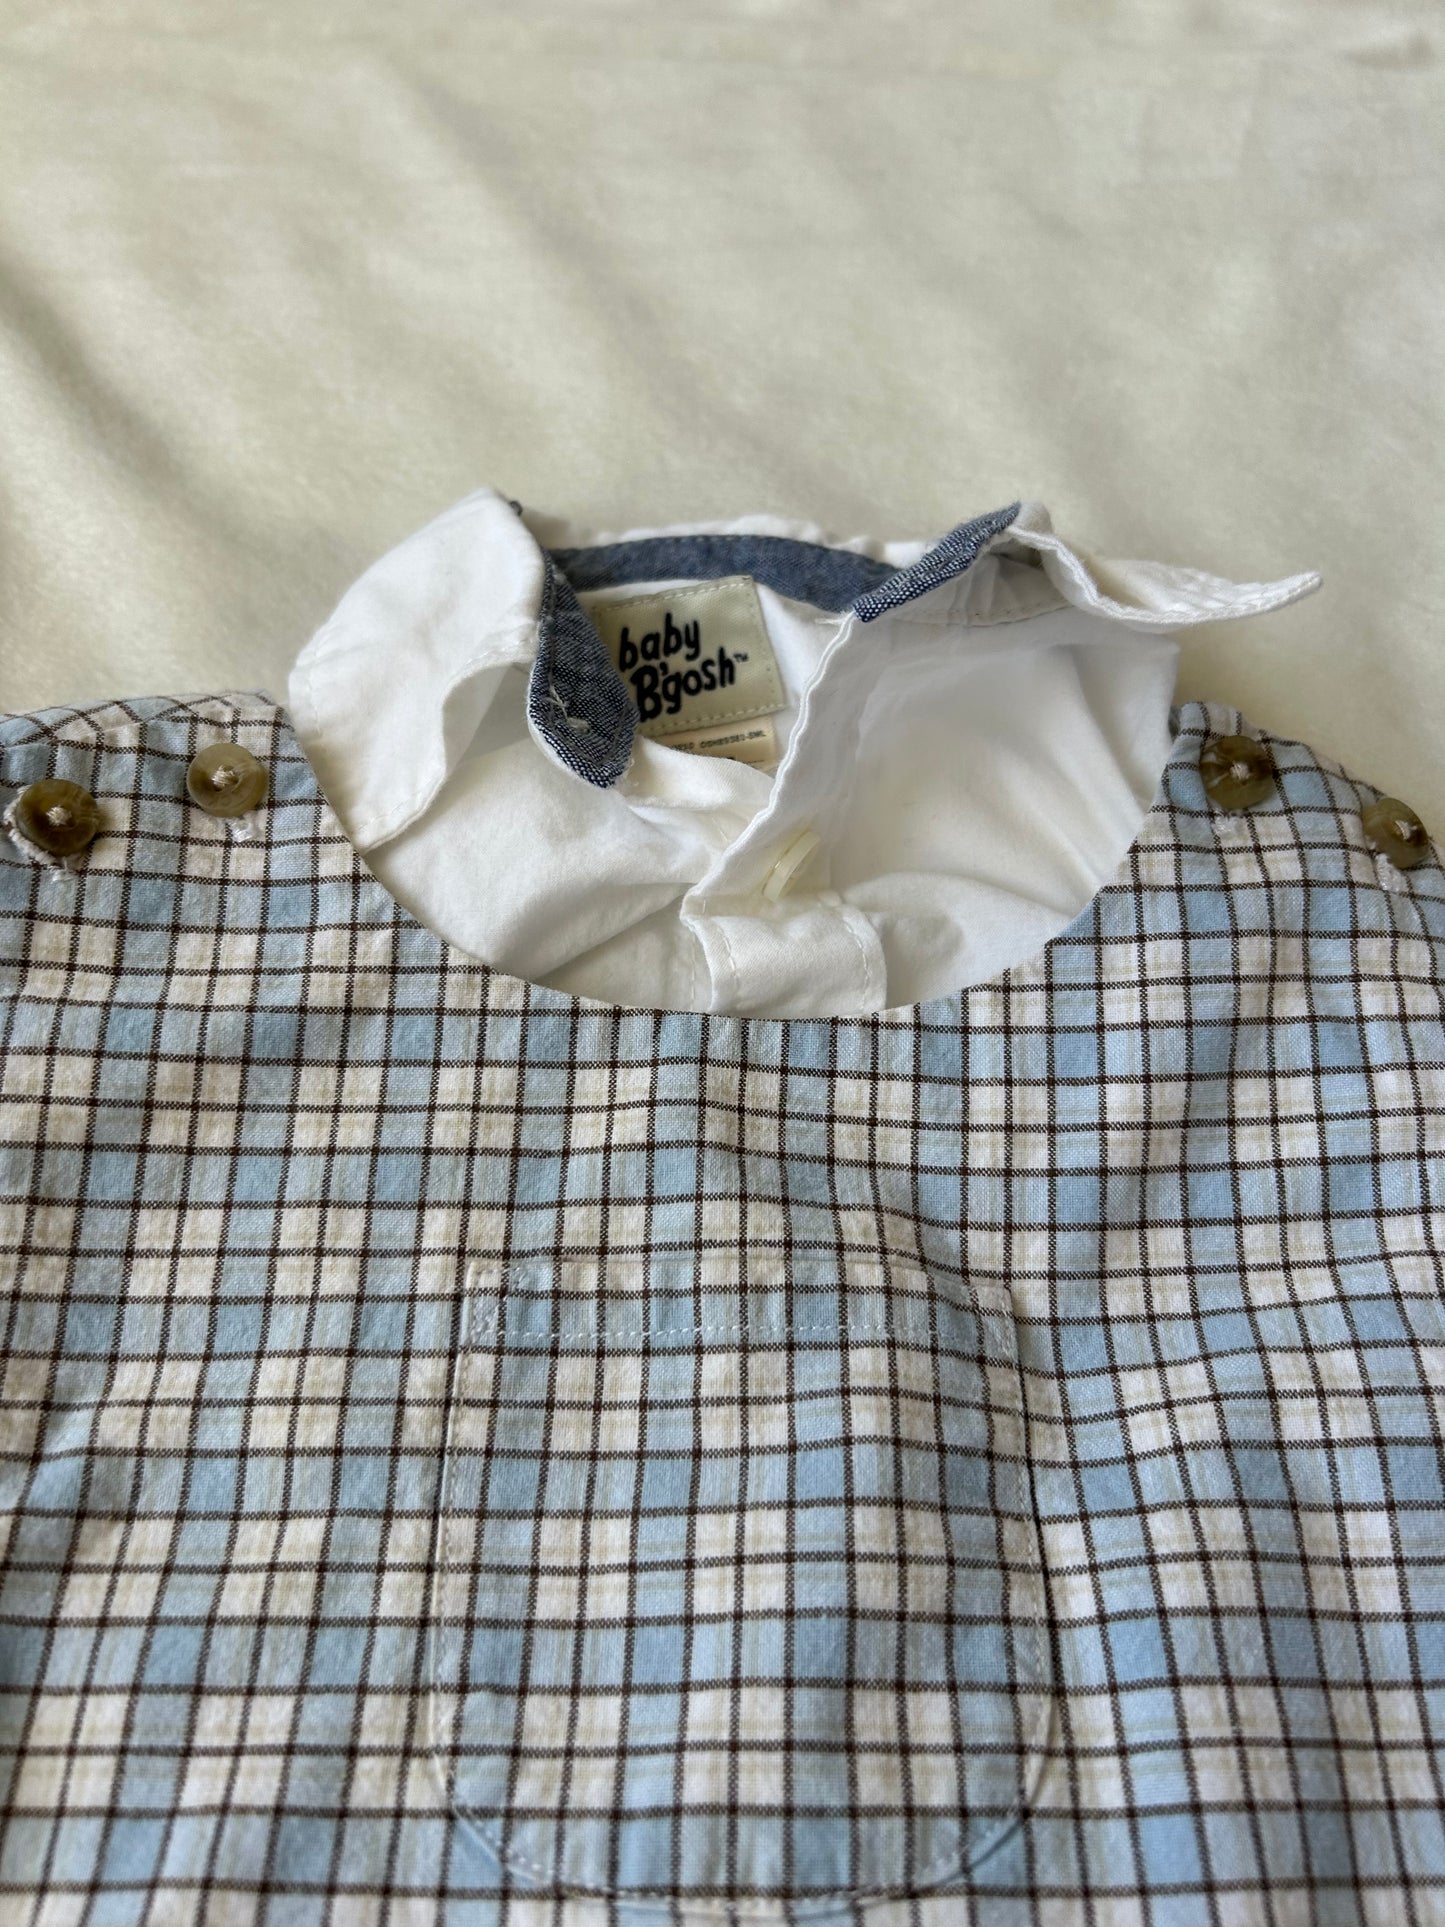 Janie and Jack 12-18 month Boy BlueWhite Gingham Overalls with white button up GREAT FOR EASTER